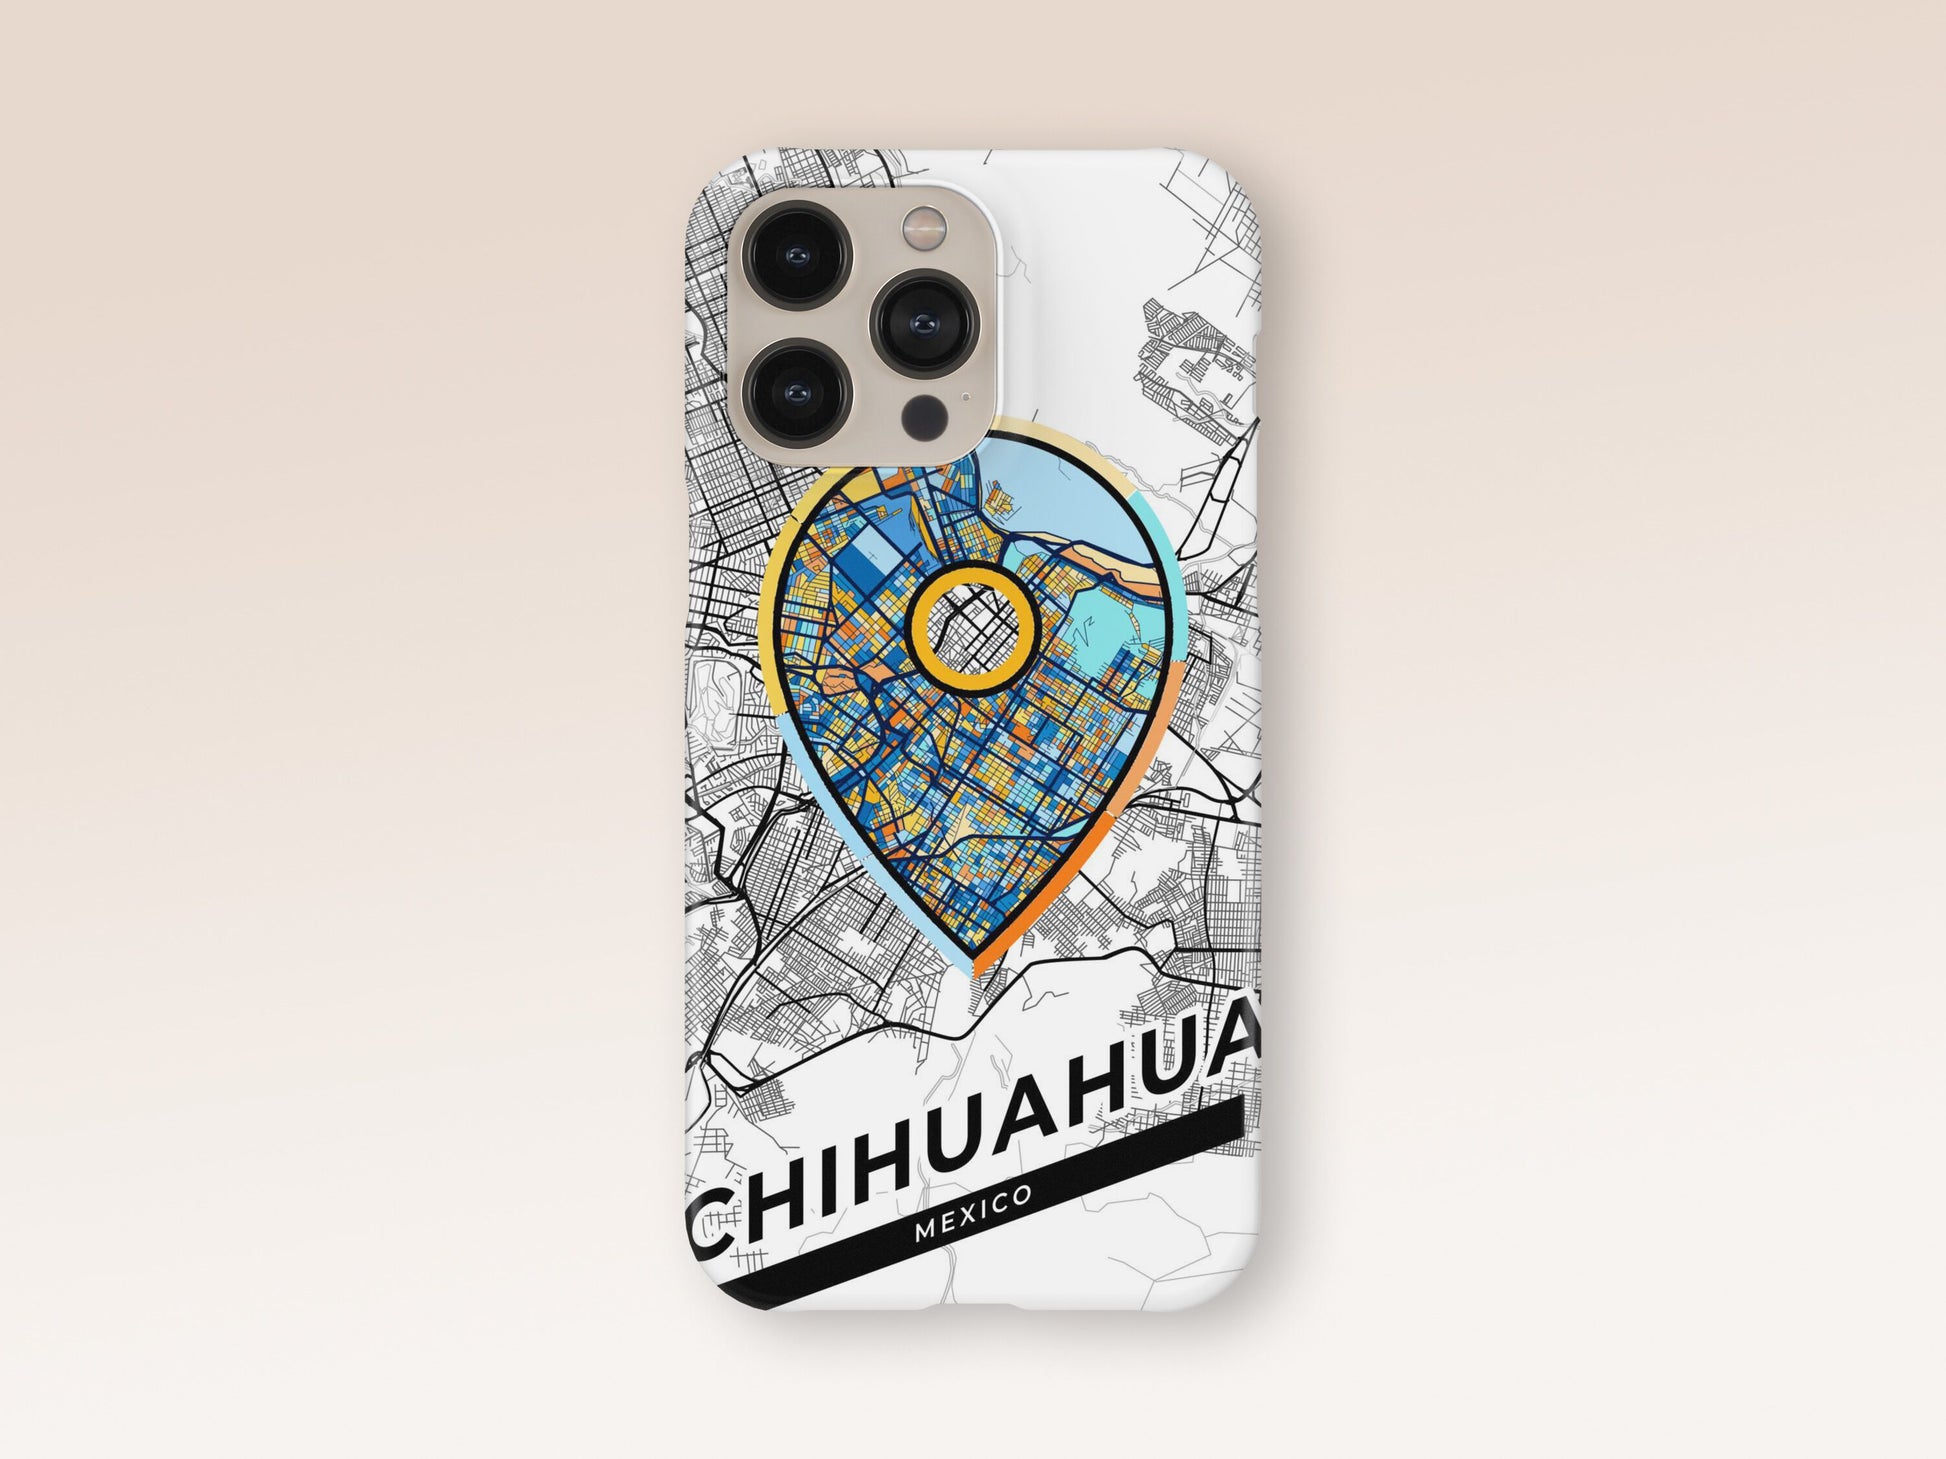 Chihuahua Mexico slim phone case with colorful icon. Birthday, wedding or housewarming gift. Couple match cases. 1